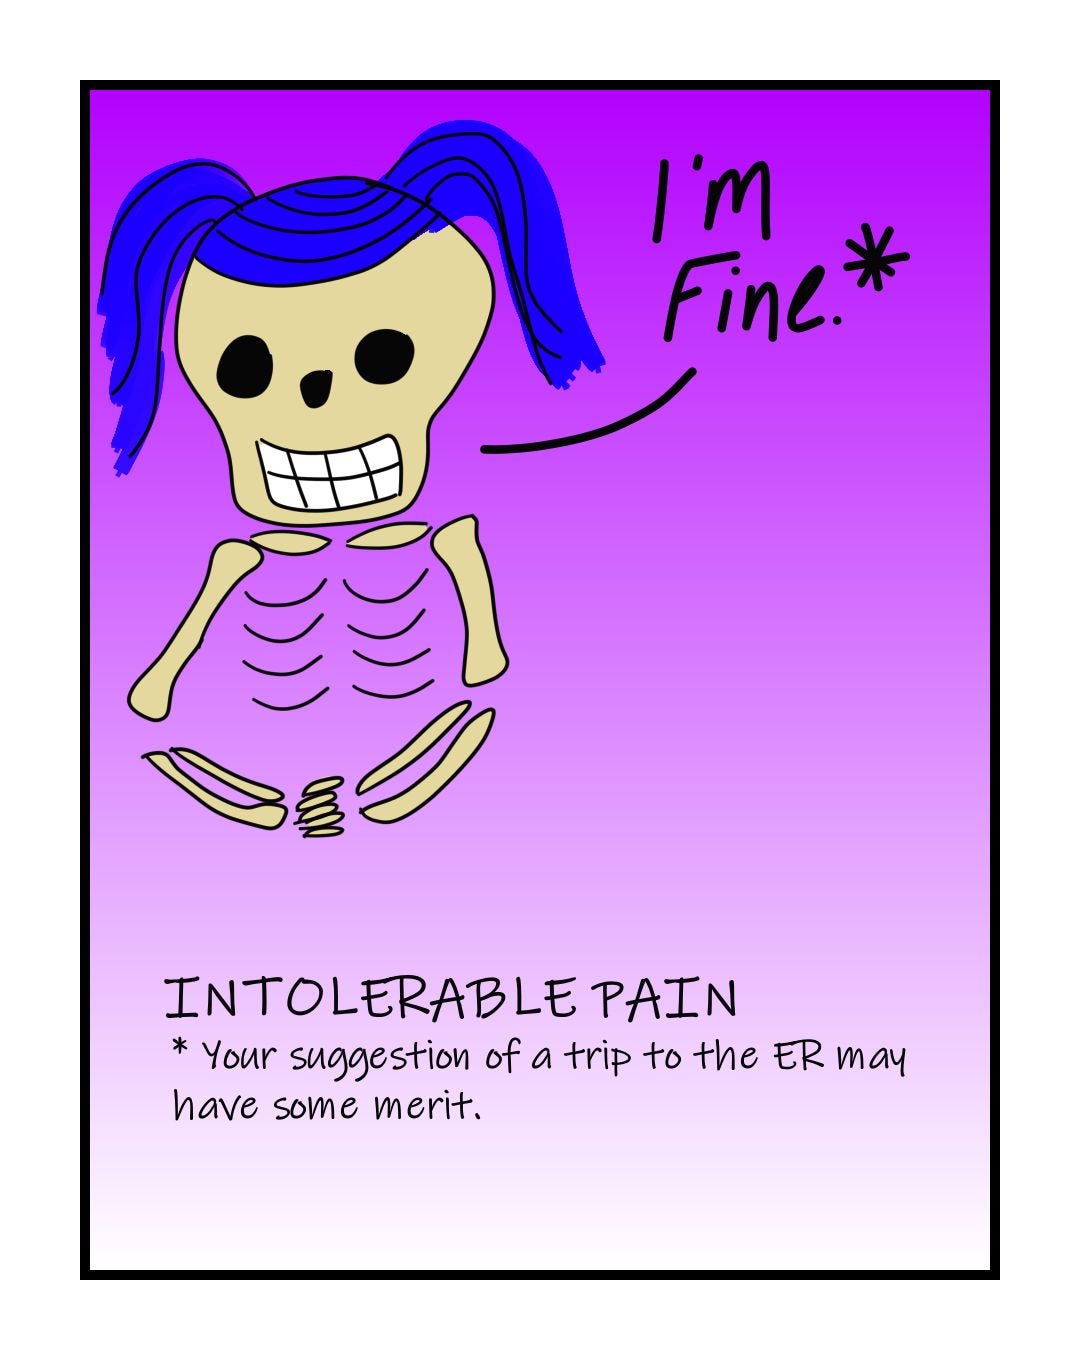 "I'm fine." INTOLERABLE PAIN (Translation: "Your suggestion of a trip to the ER may have some merit."